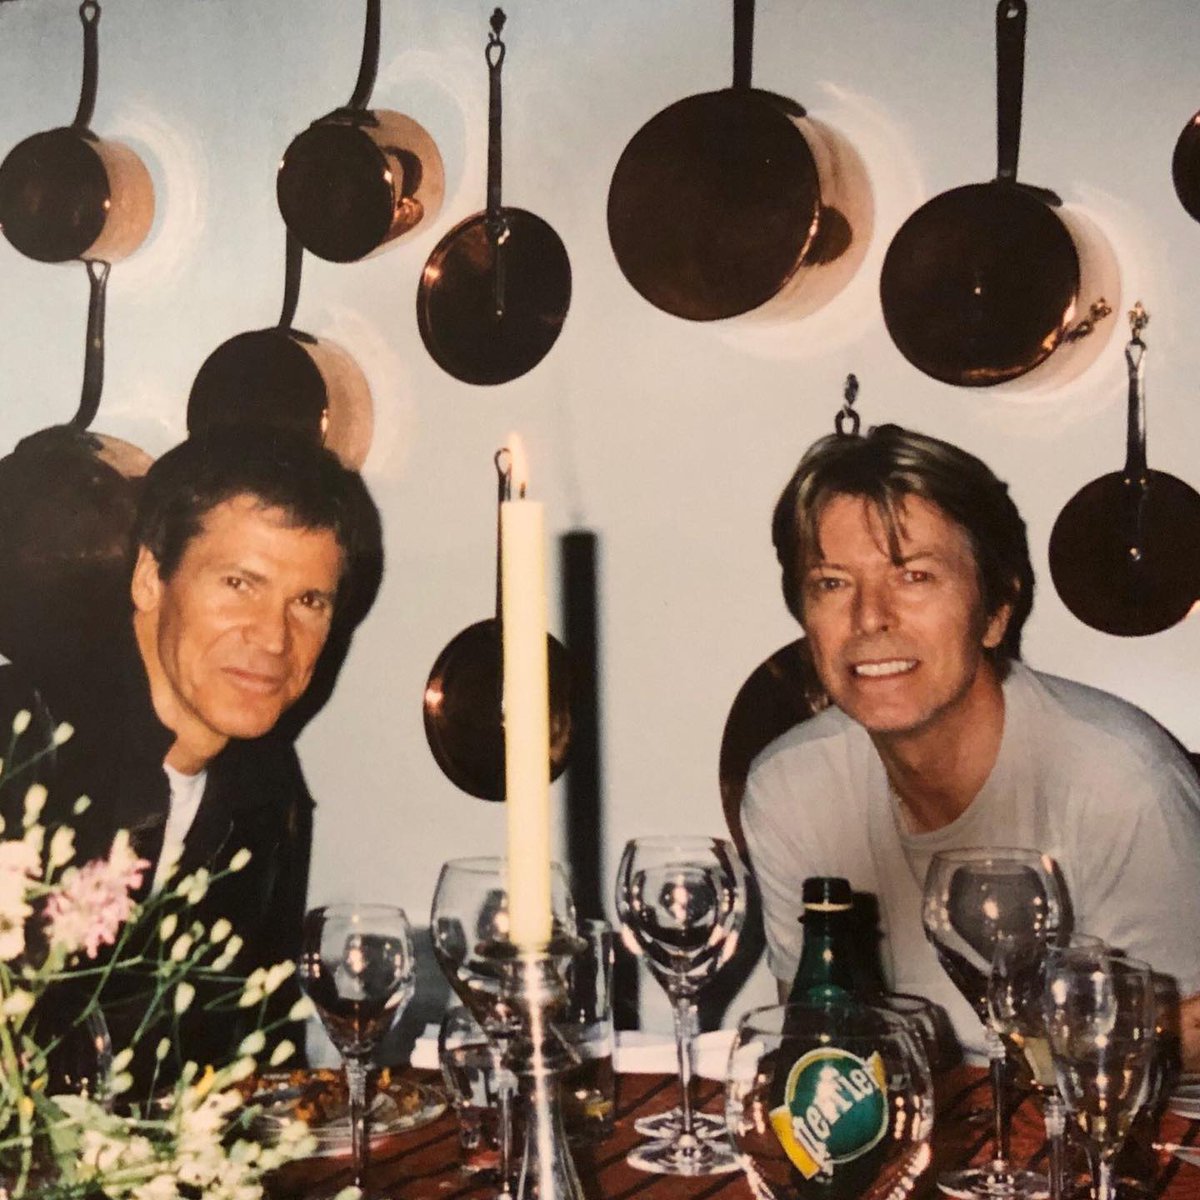 Very sad news, David Sanborn passed away on May 12th. He played saxophone on Young Americans and is seen here at dinner with David in Montreux, Switzerland, July 2002. 

May he RIP.